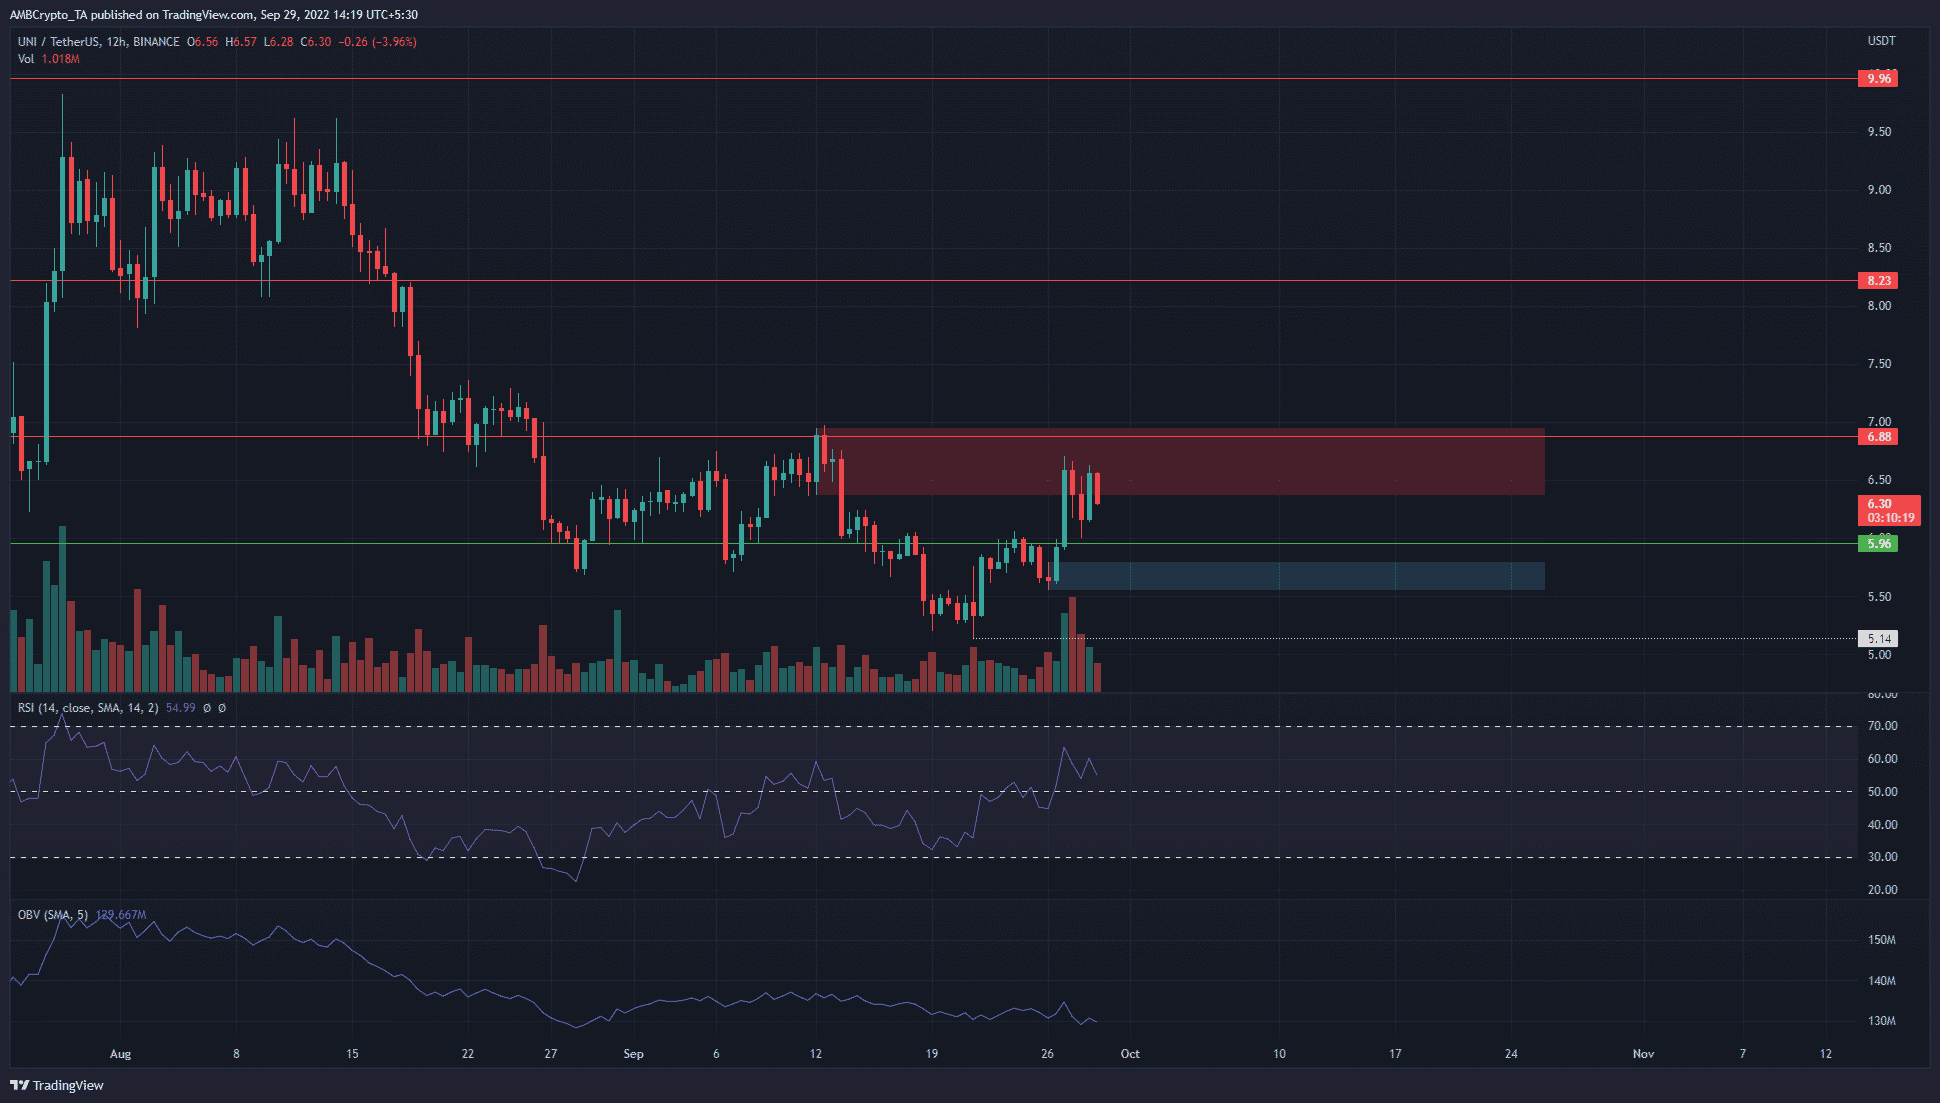 Can traders expect Uniswap to drop to $5.7?